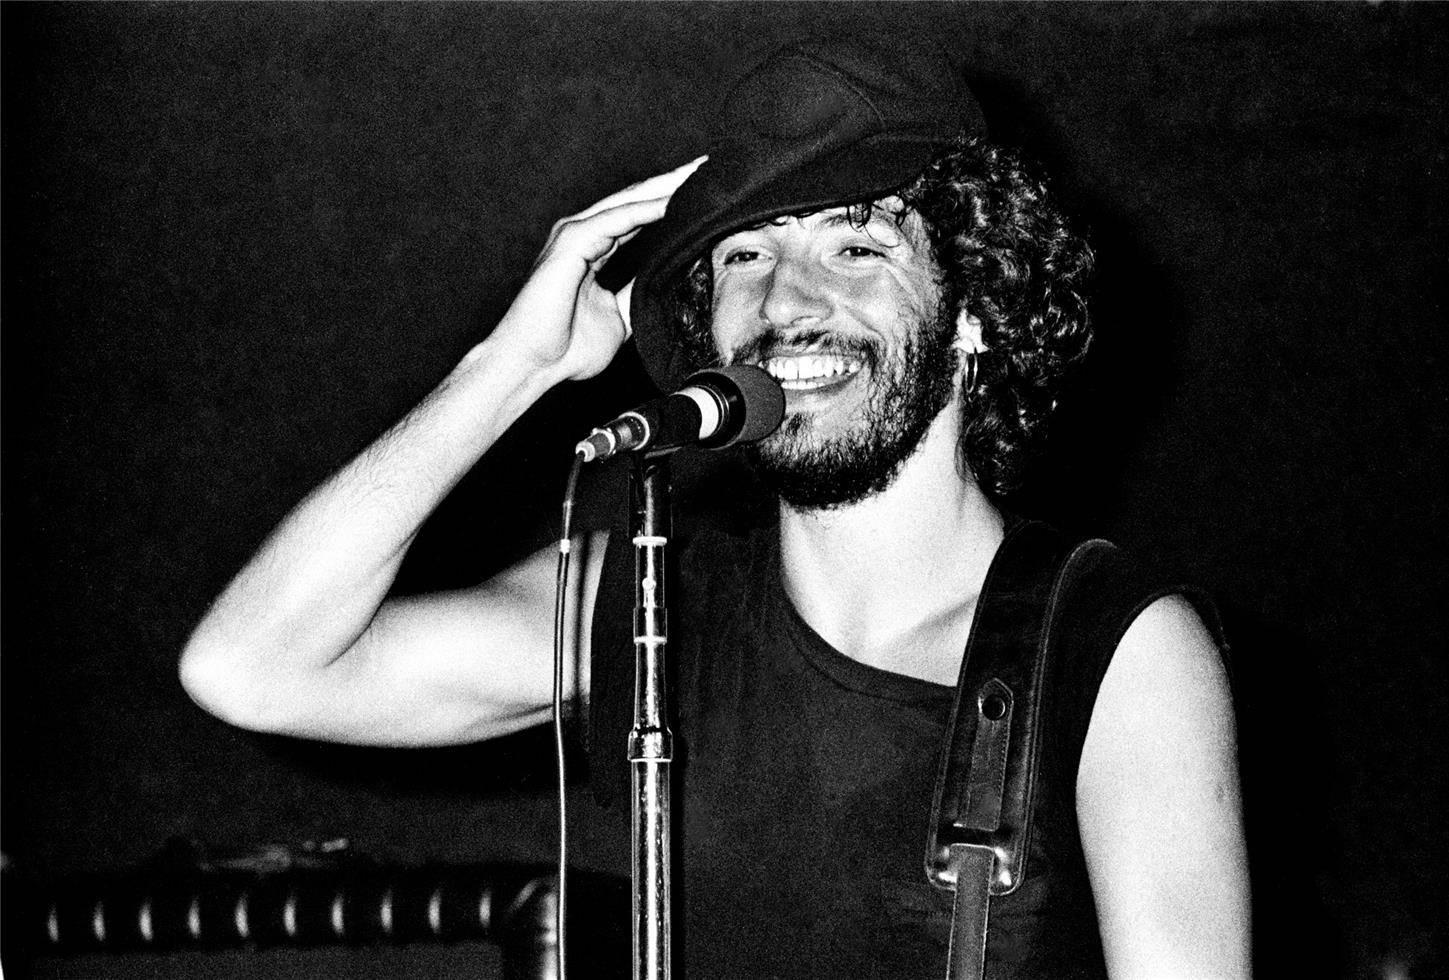 Springsteen, NYC, 1975